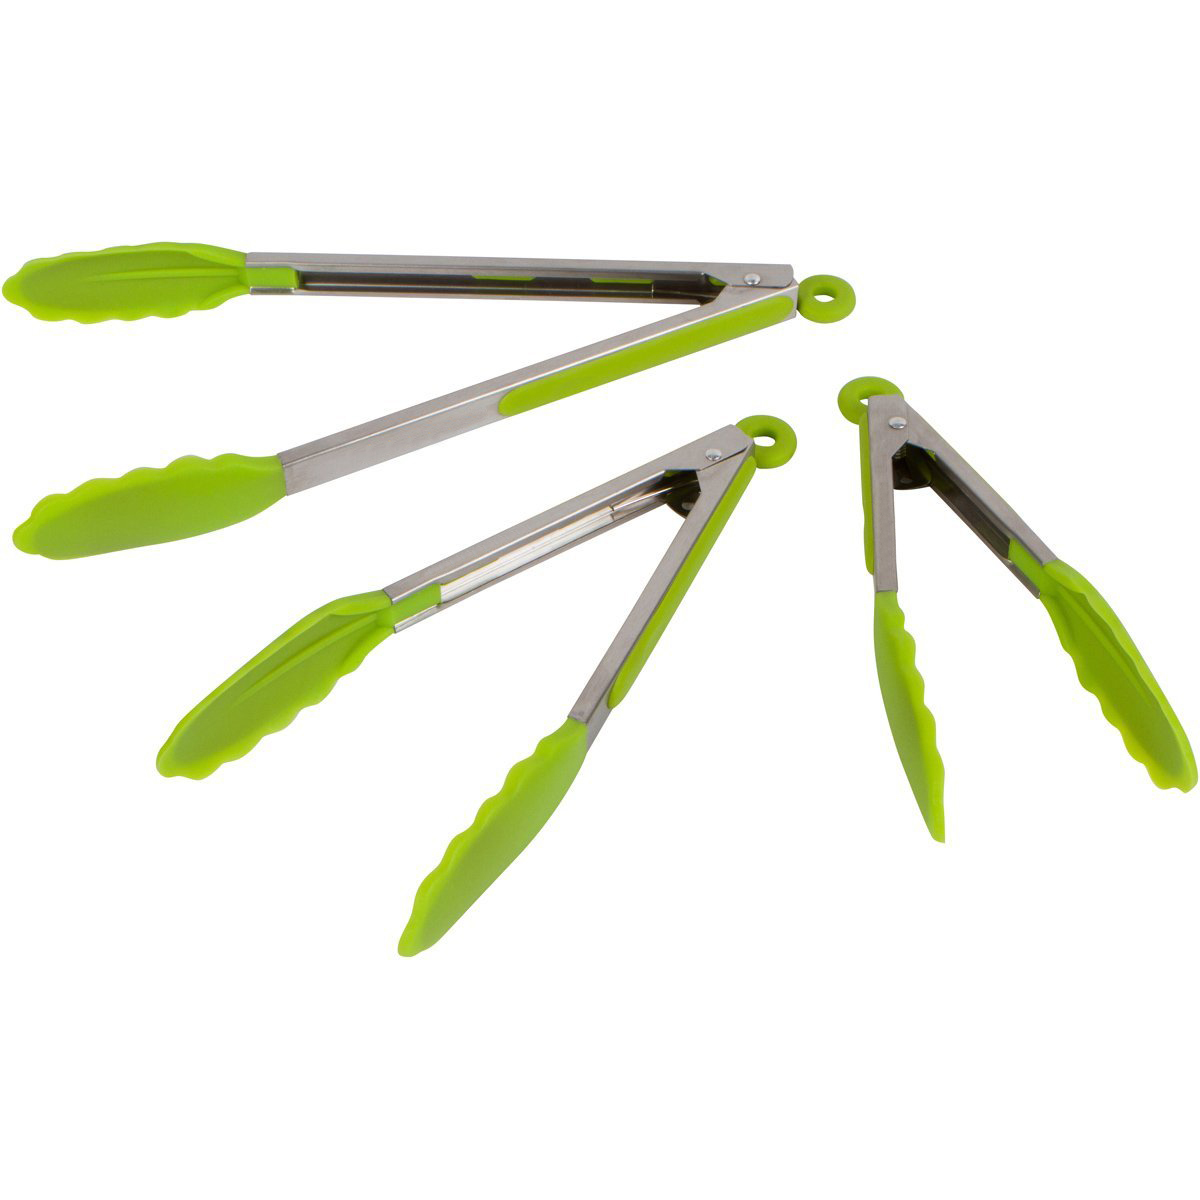 Cooking Kitchen Tongs with Silicone Tips - Stainless Steel tongs for  cooking - 7 and 9 and 12 Tongs With Silicone Rubber Grips 